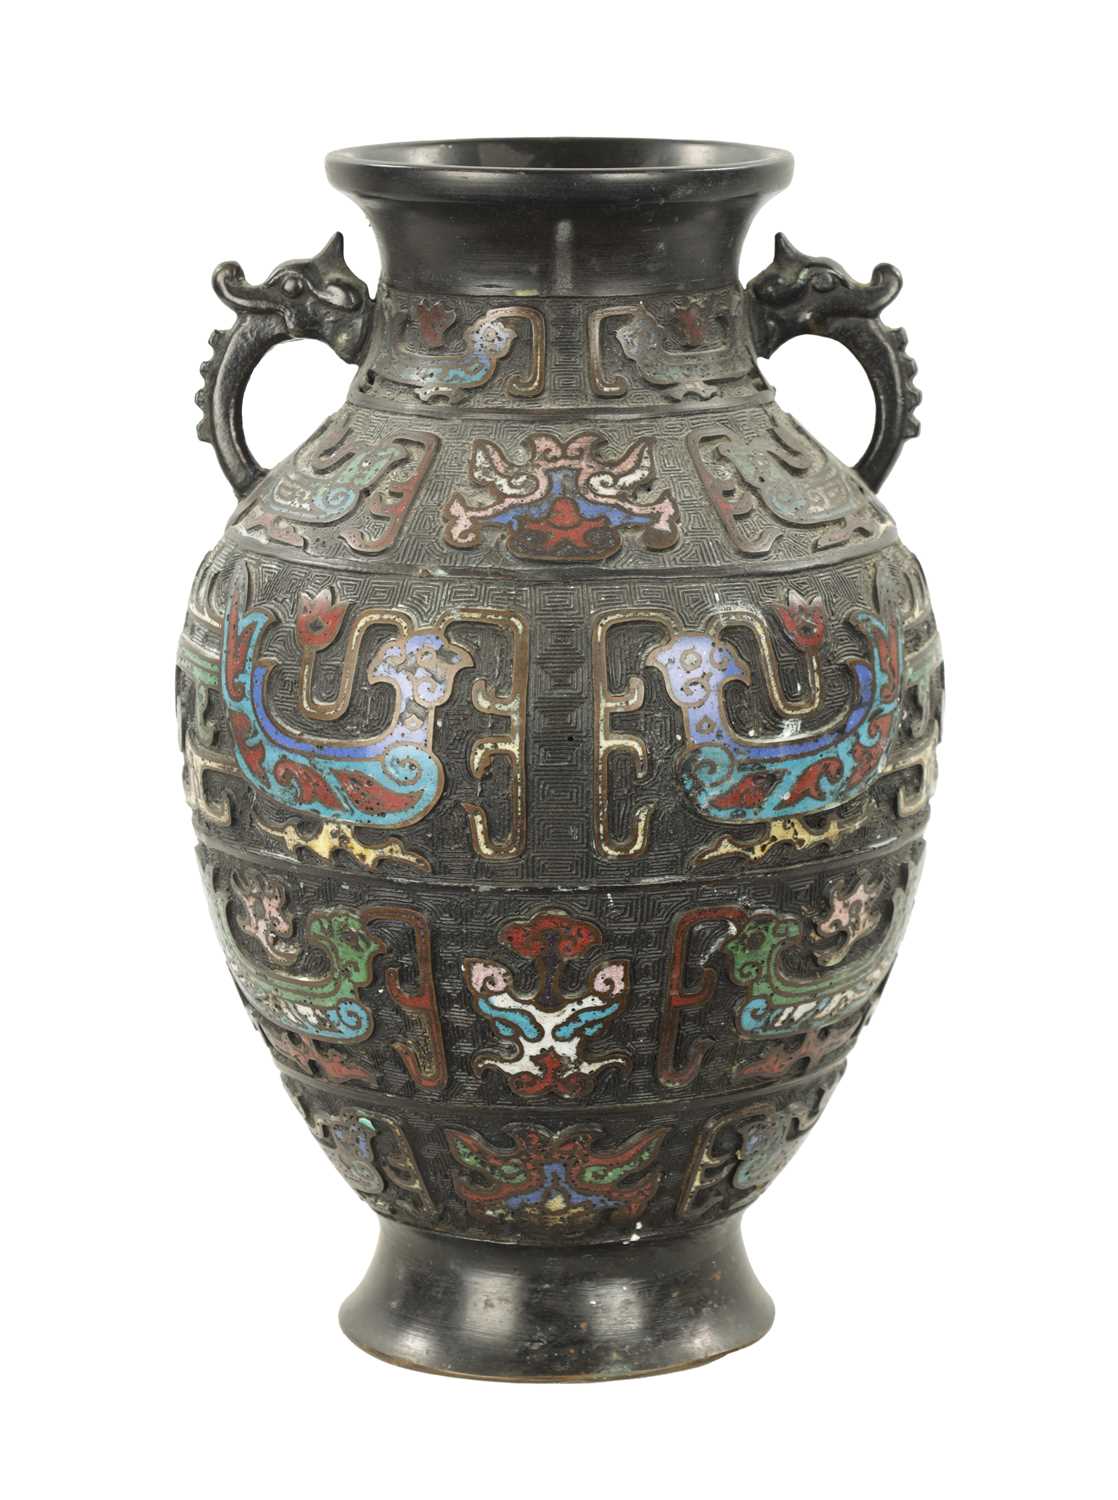 A CHINESE BRONZE AND CLOISONNE ENAMEL VASE